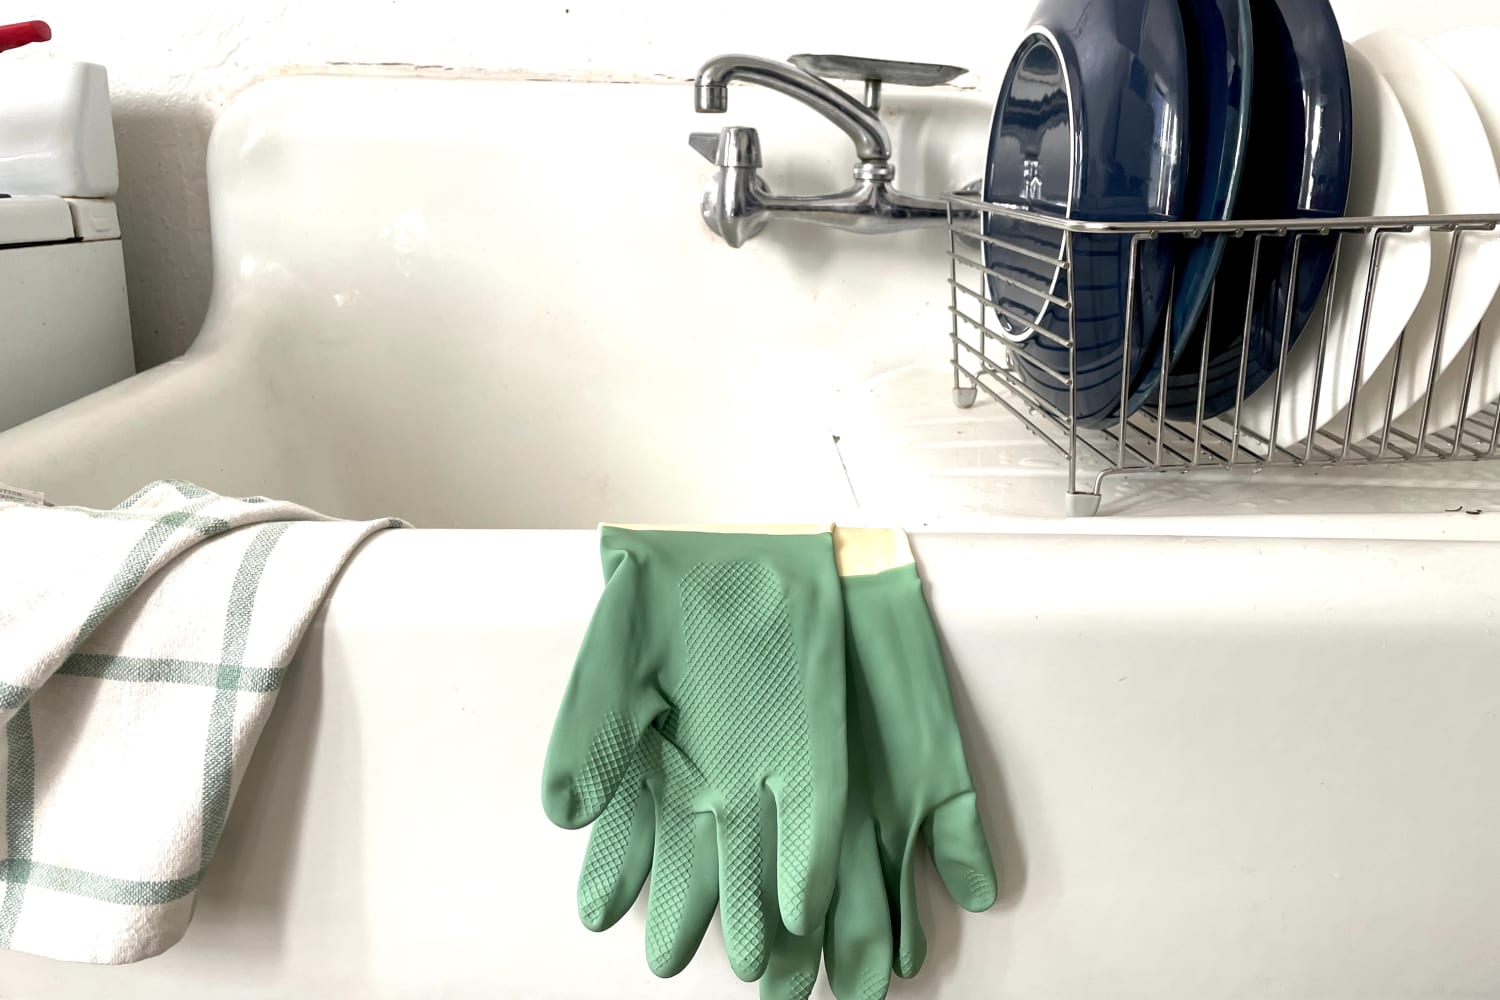 https://cdn.apartmenttherapy.info/image/upload/f_auto,q_auto:eco,c_fill,g_auto,w_1500,ar_3:2/k%2FEdit%2F2022-12-IKEA-Dishwashing-Gloves-Review%2Fikea_gloves_on_sink